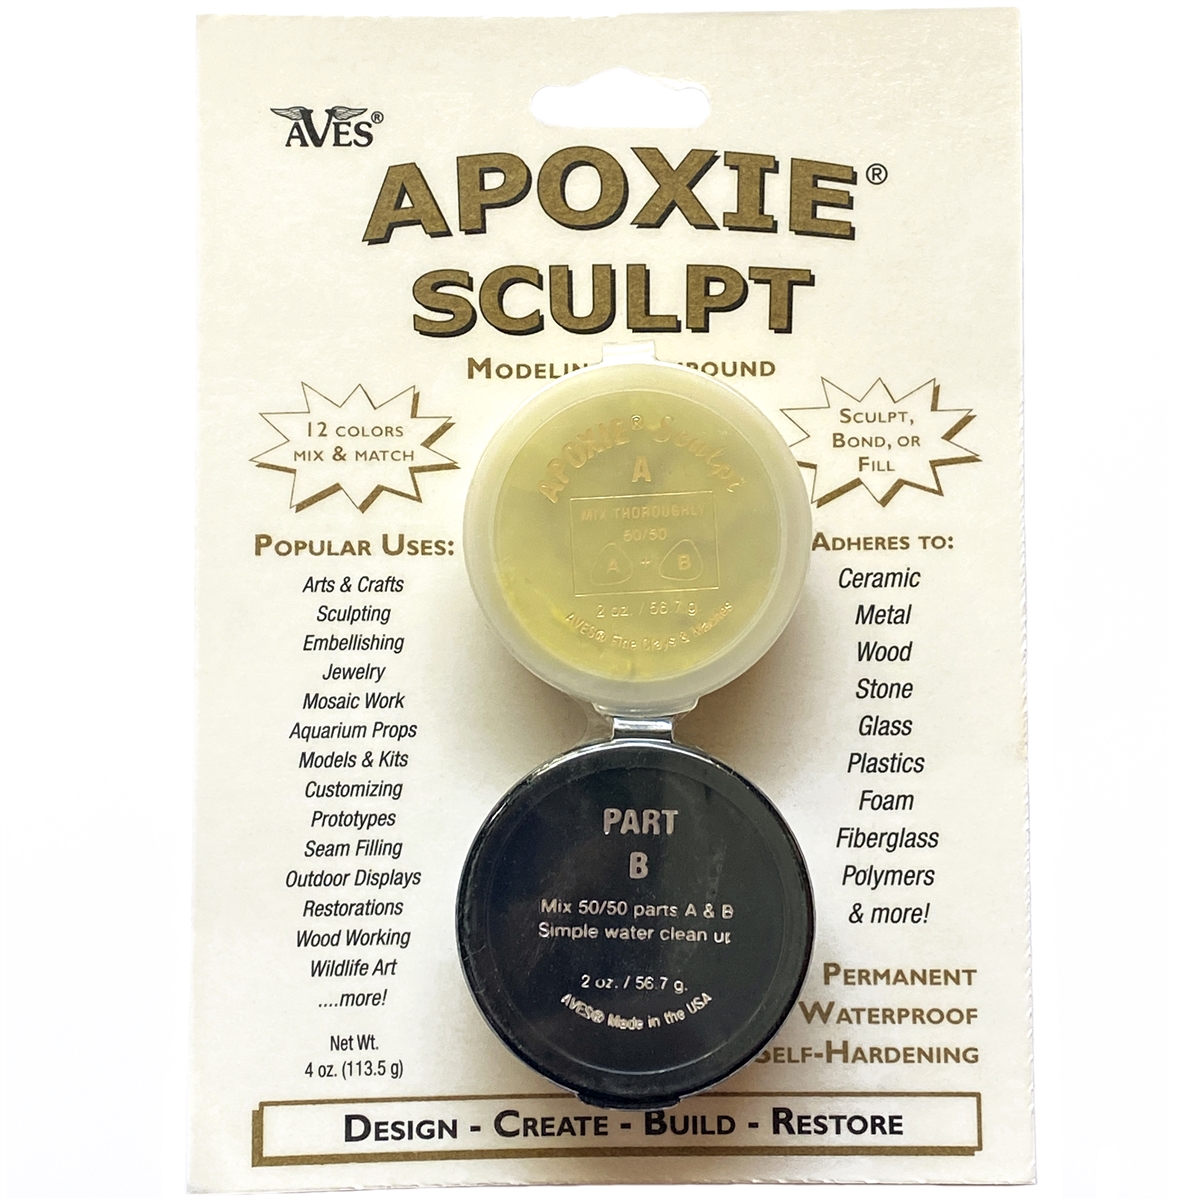 yellow apoxie sculpt, epoxy resin clay, yellow, aves apoxie sculpt, apoxie  sculpt, jewelry clay, resin clay, epoxy resin, adhesive clay, epoxy clay,  clap supplies, vintage supplies, jewelry making, jewelry supplies, US made